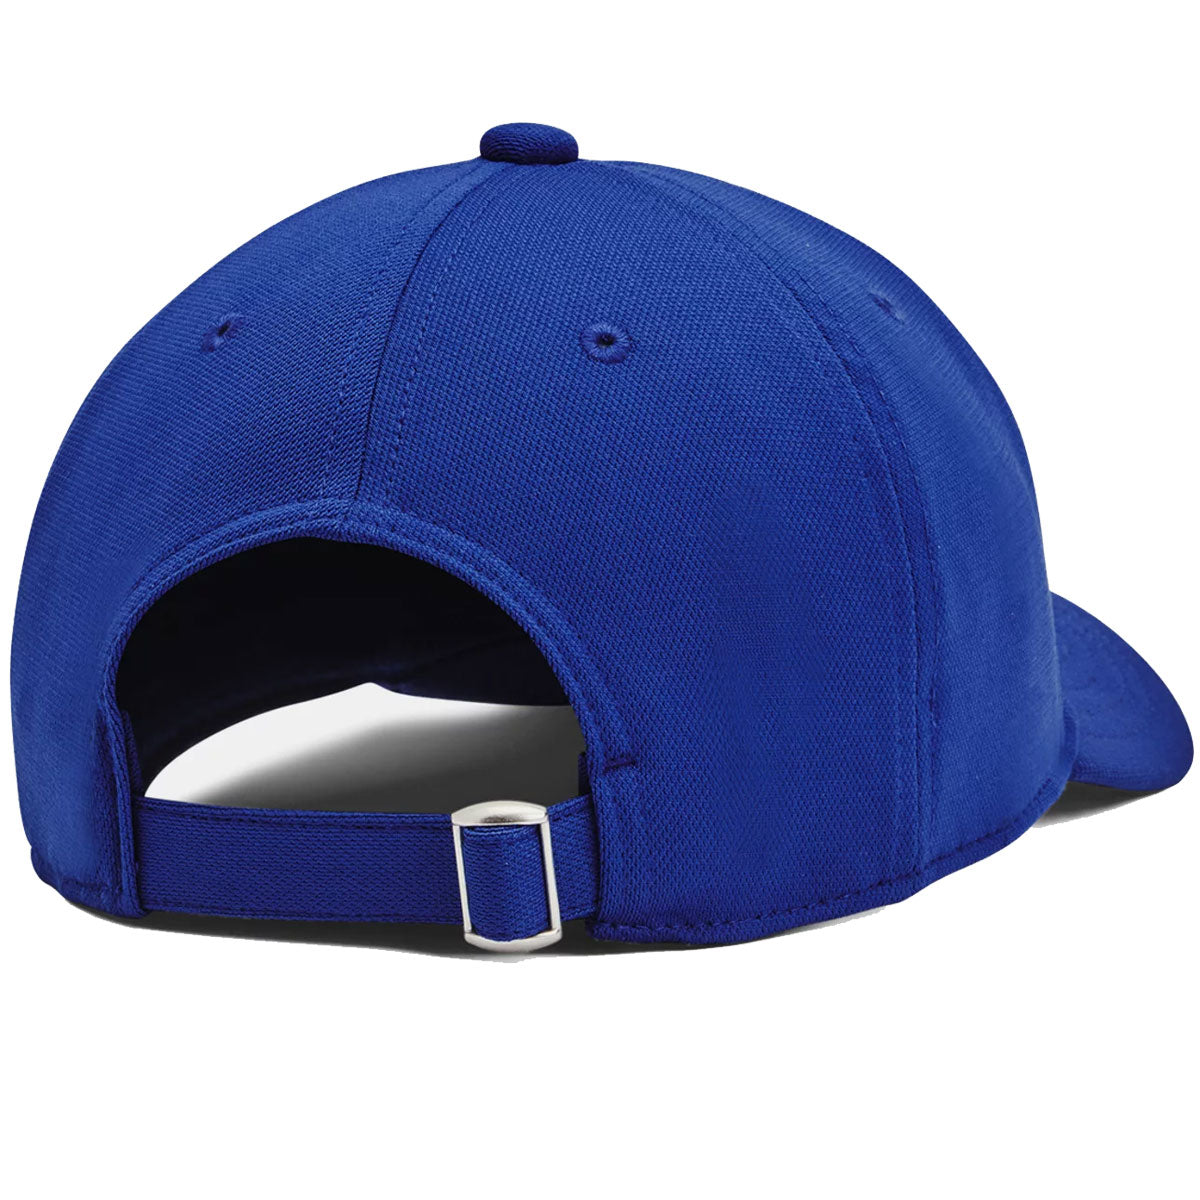 Under Armour Adjustable Blitzing Cap - Youth - Royal/White